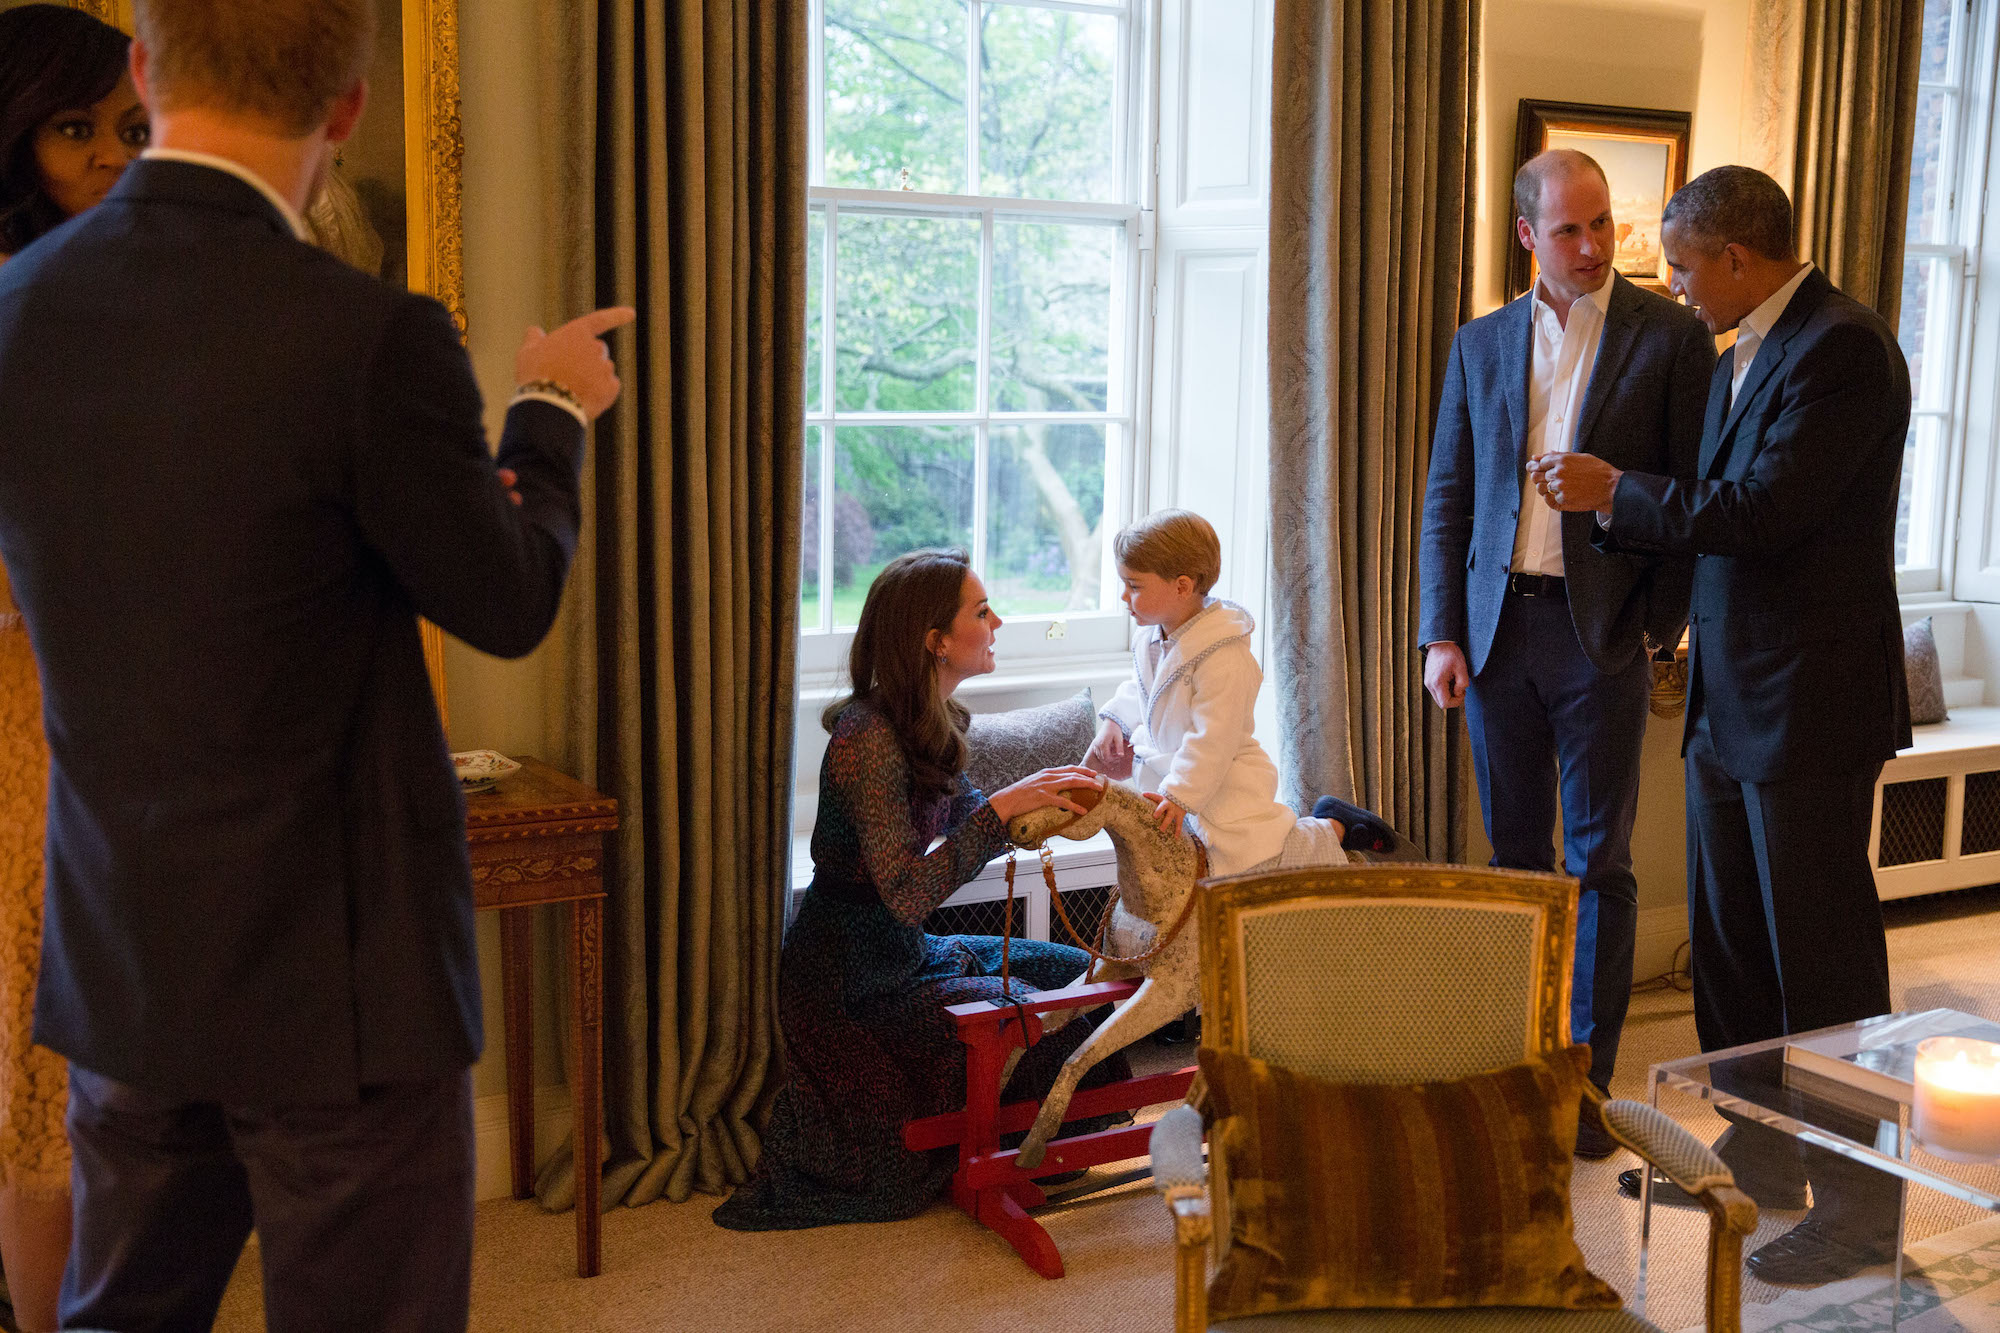 Barack Obama talks with Prince William as Kate Middleton plays with Prince George as Michelle Obama talks with Prince Harry